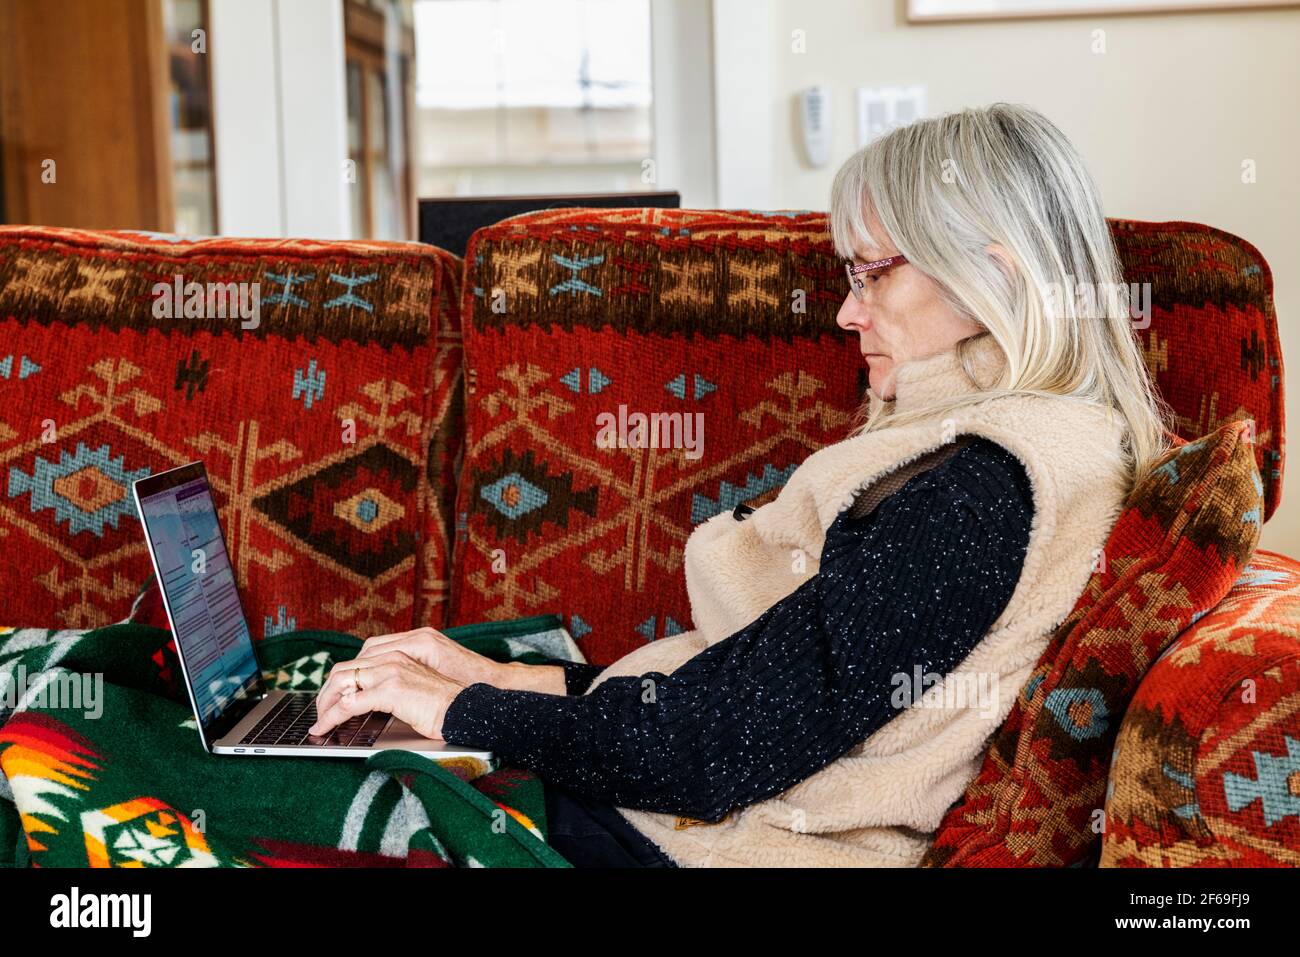 Senior woman seated on living room couch working on laptop computer Stock Photo